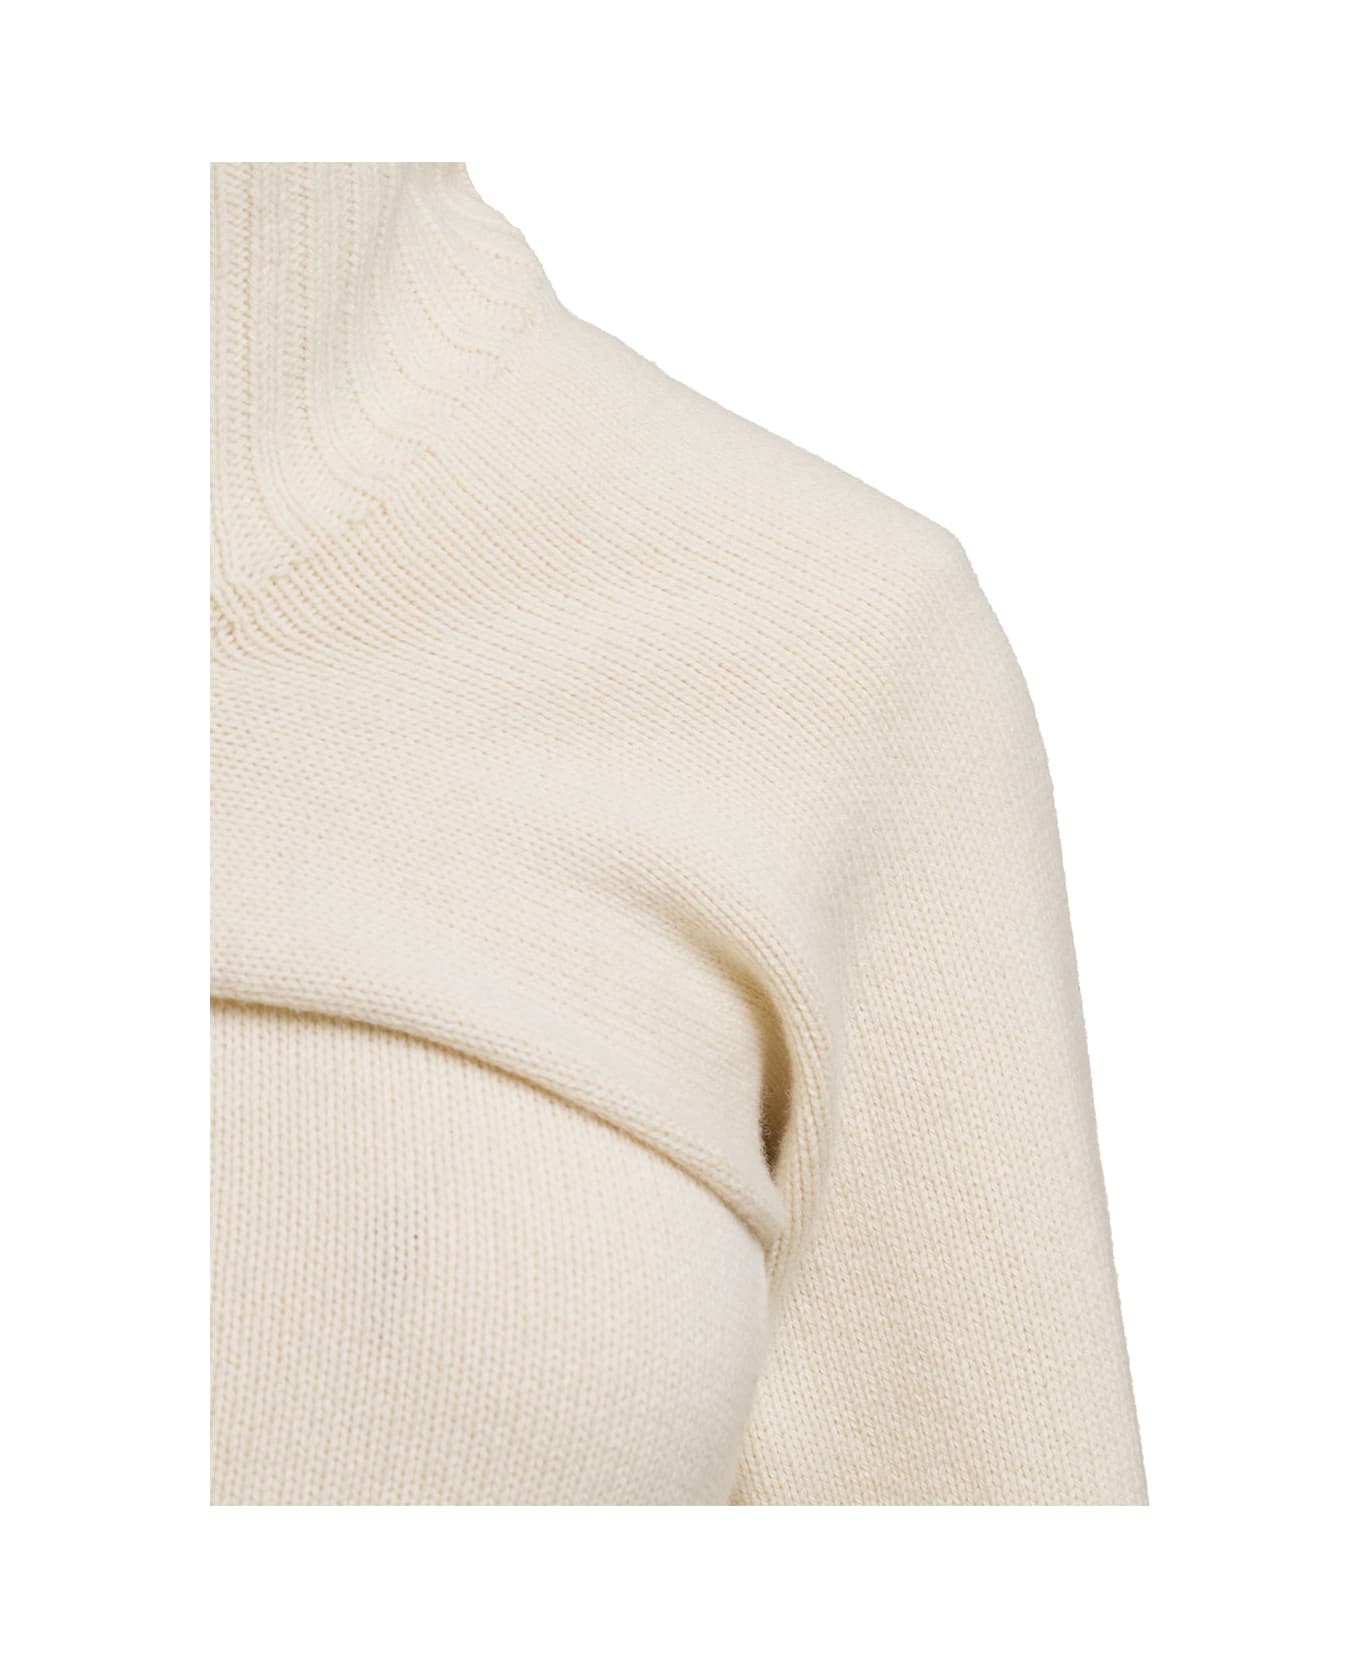 Jil Sander Cream White Two-piece Sweater With High-neck In Wool Woman - Beige